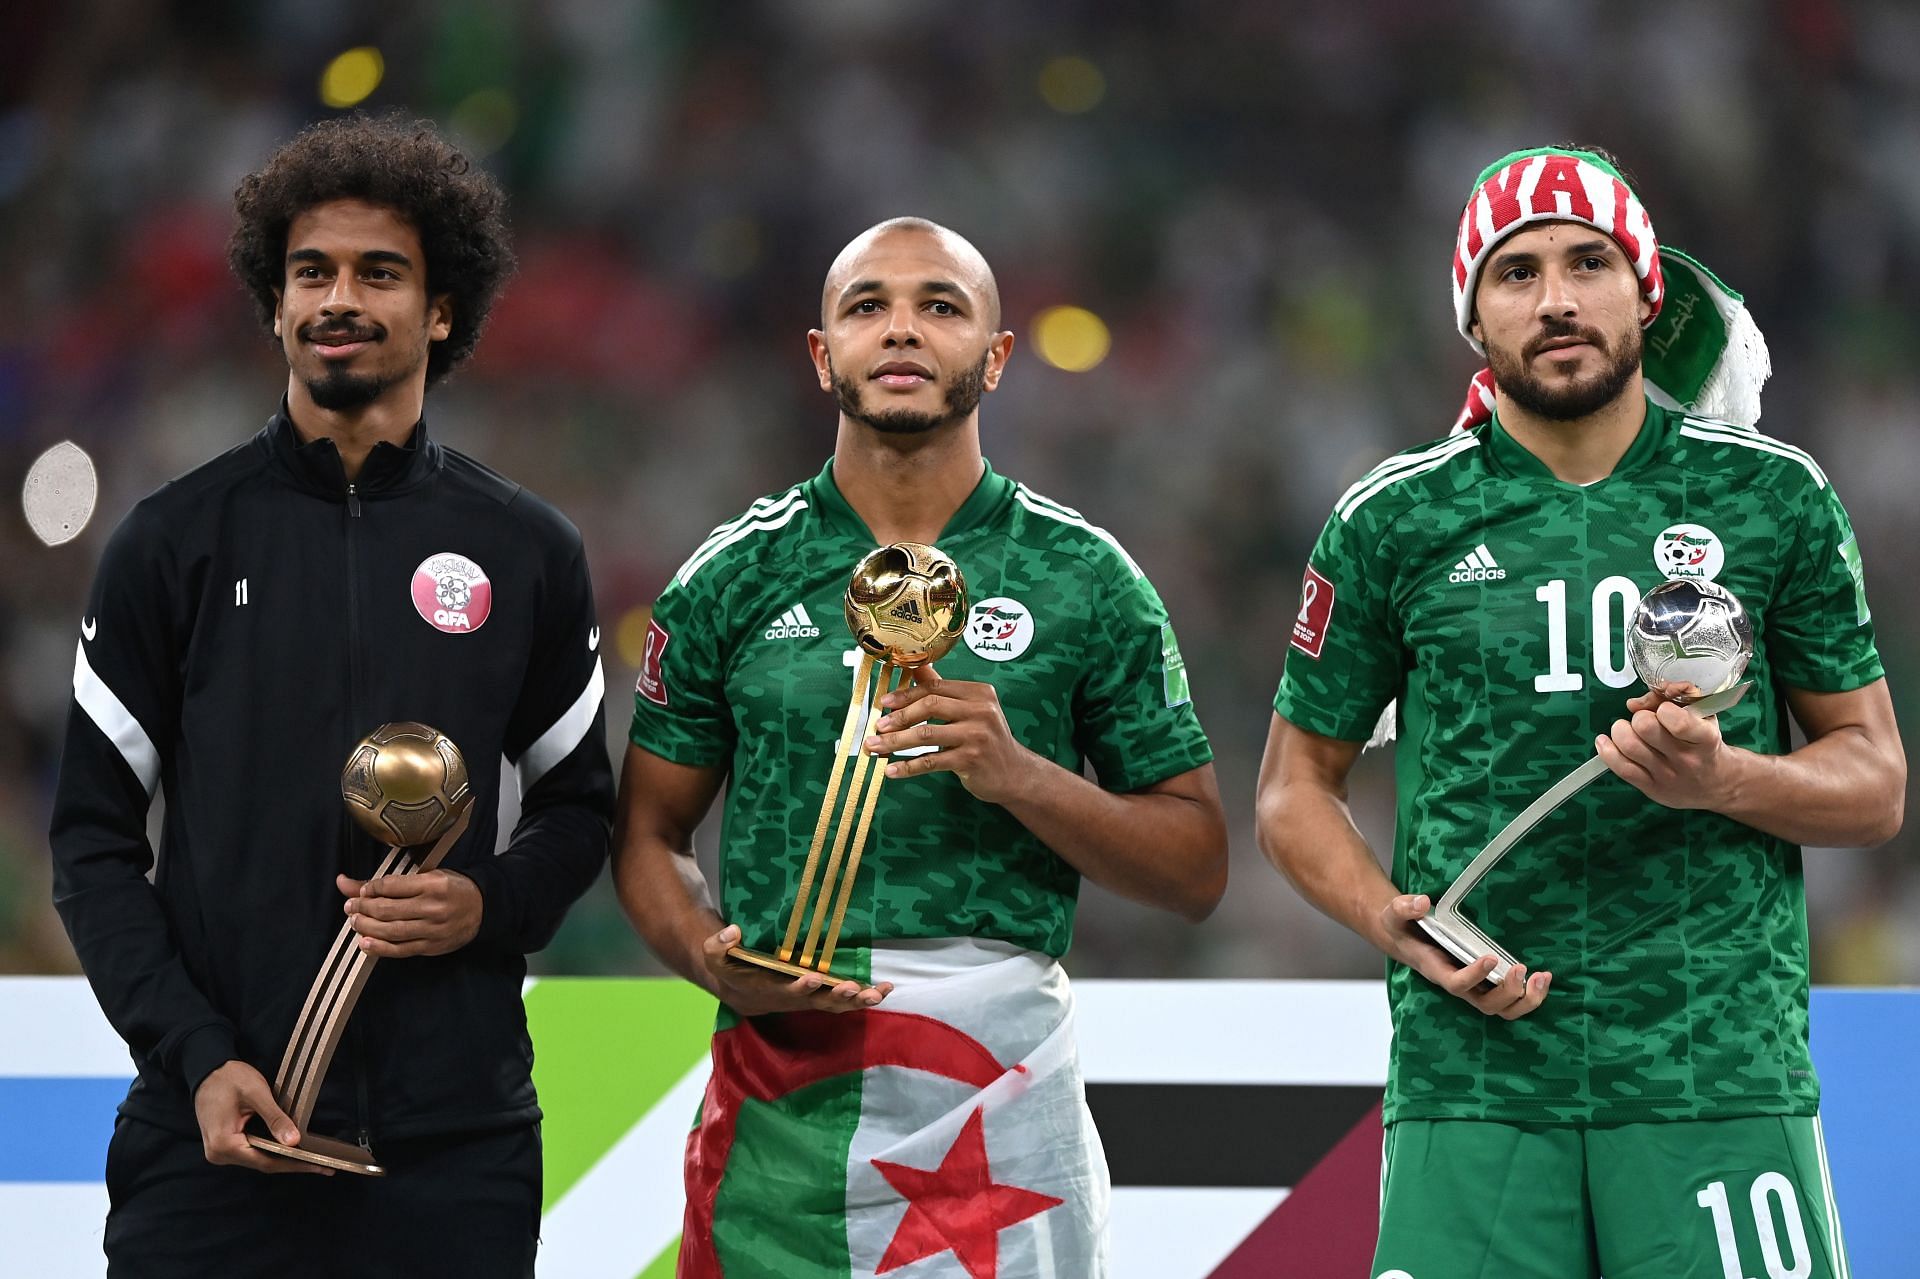 Algeria are one of the most in-form teams heading into the AFCON 2021